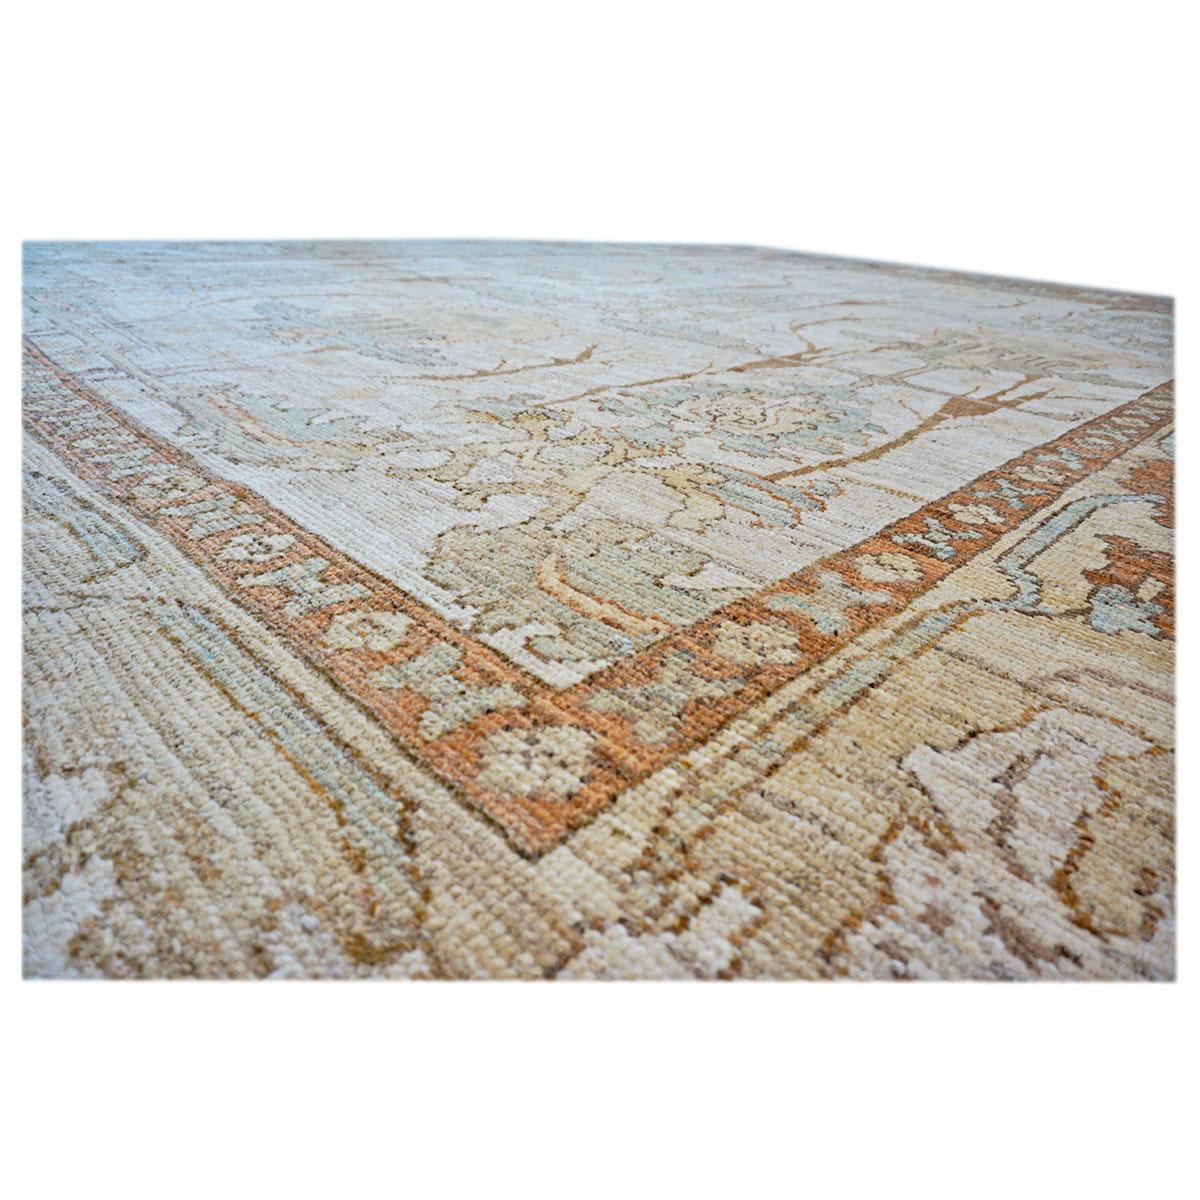 Contemporary 21st Century William Morris Donegal Carpet 13x18 Ivory, Tan, & Rust Handmade Rug For Sale